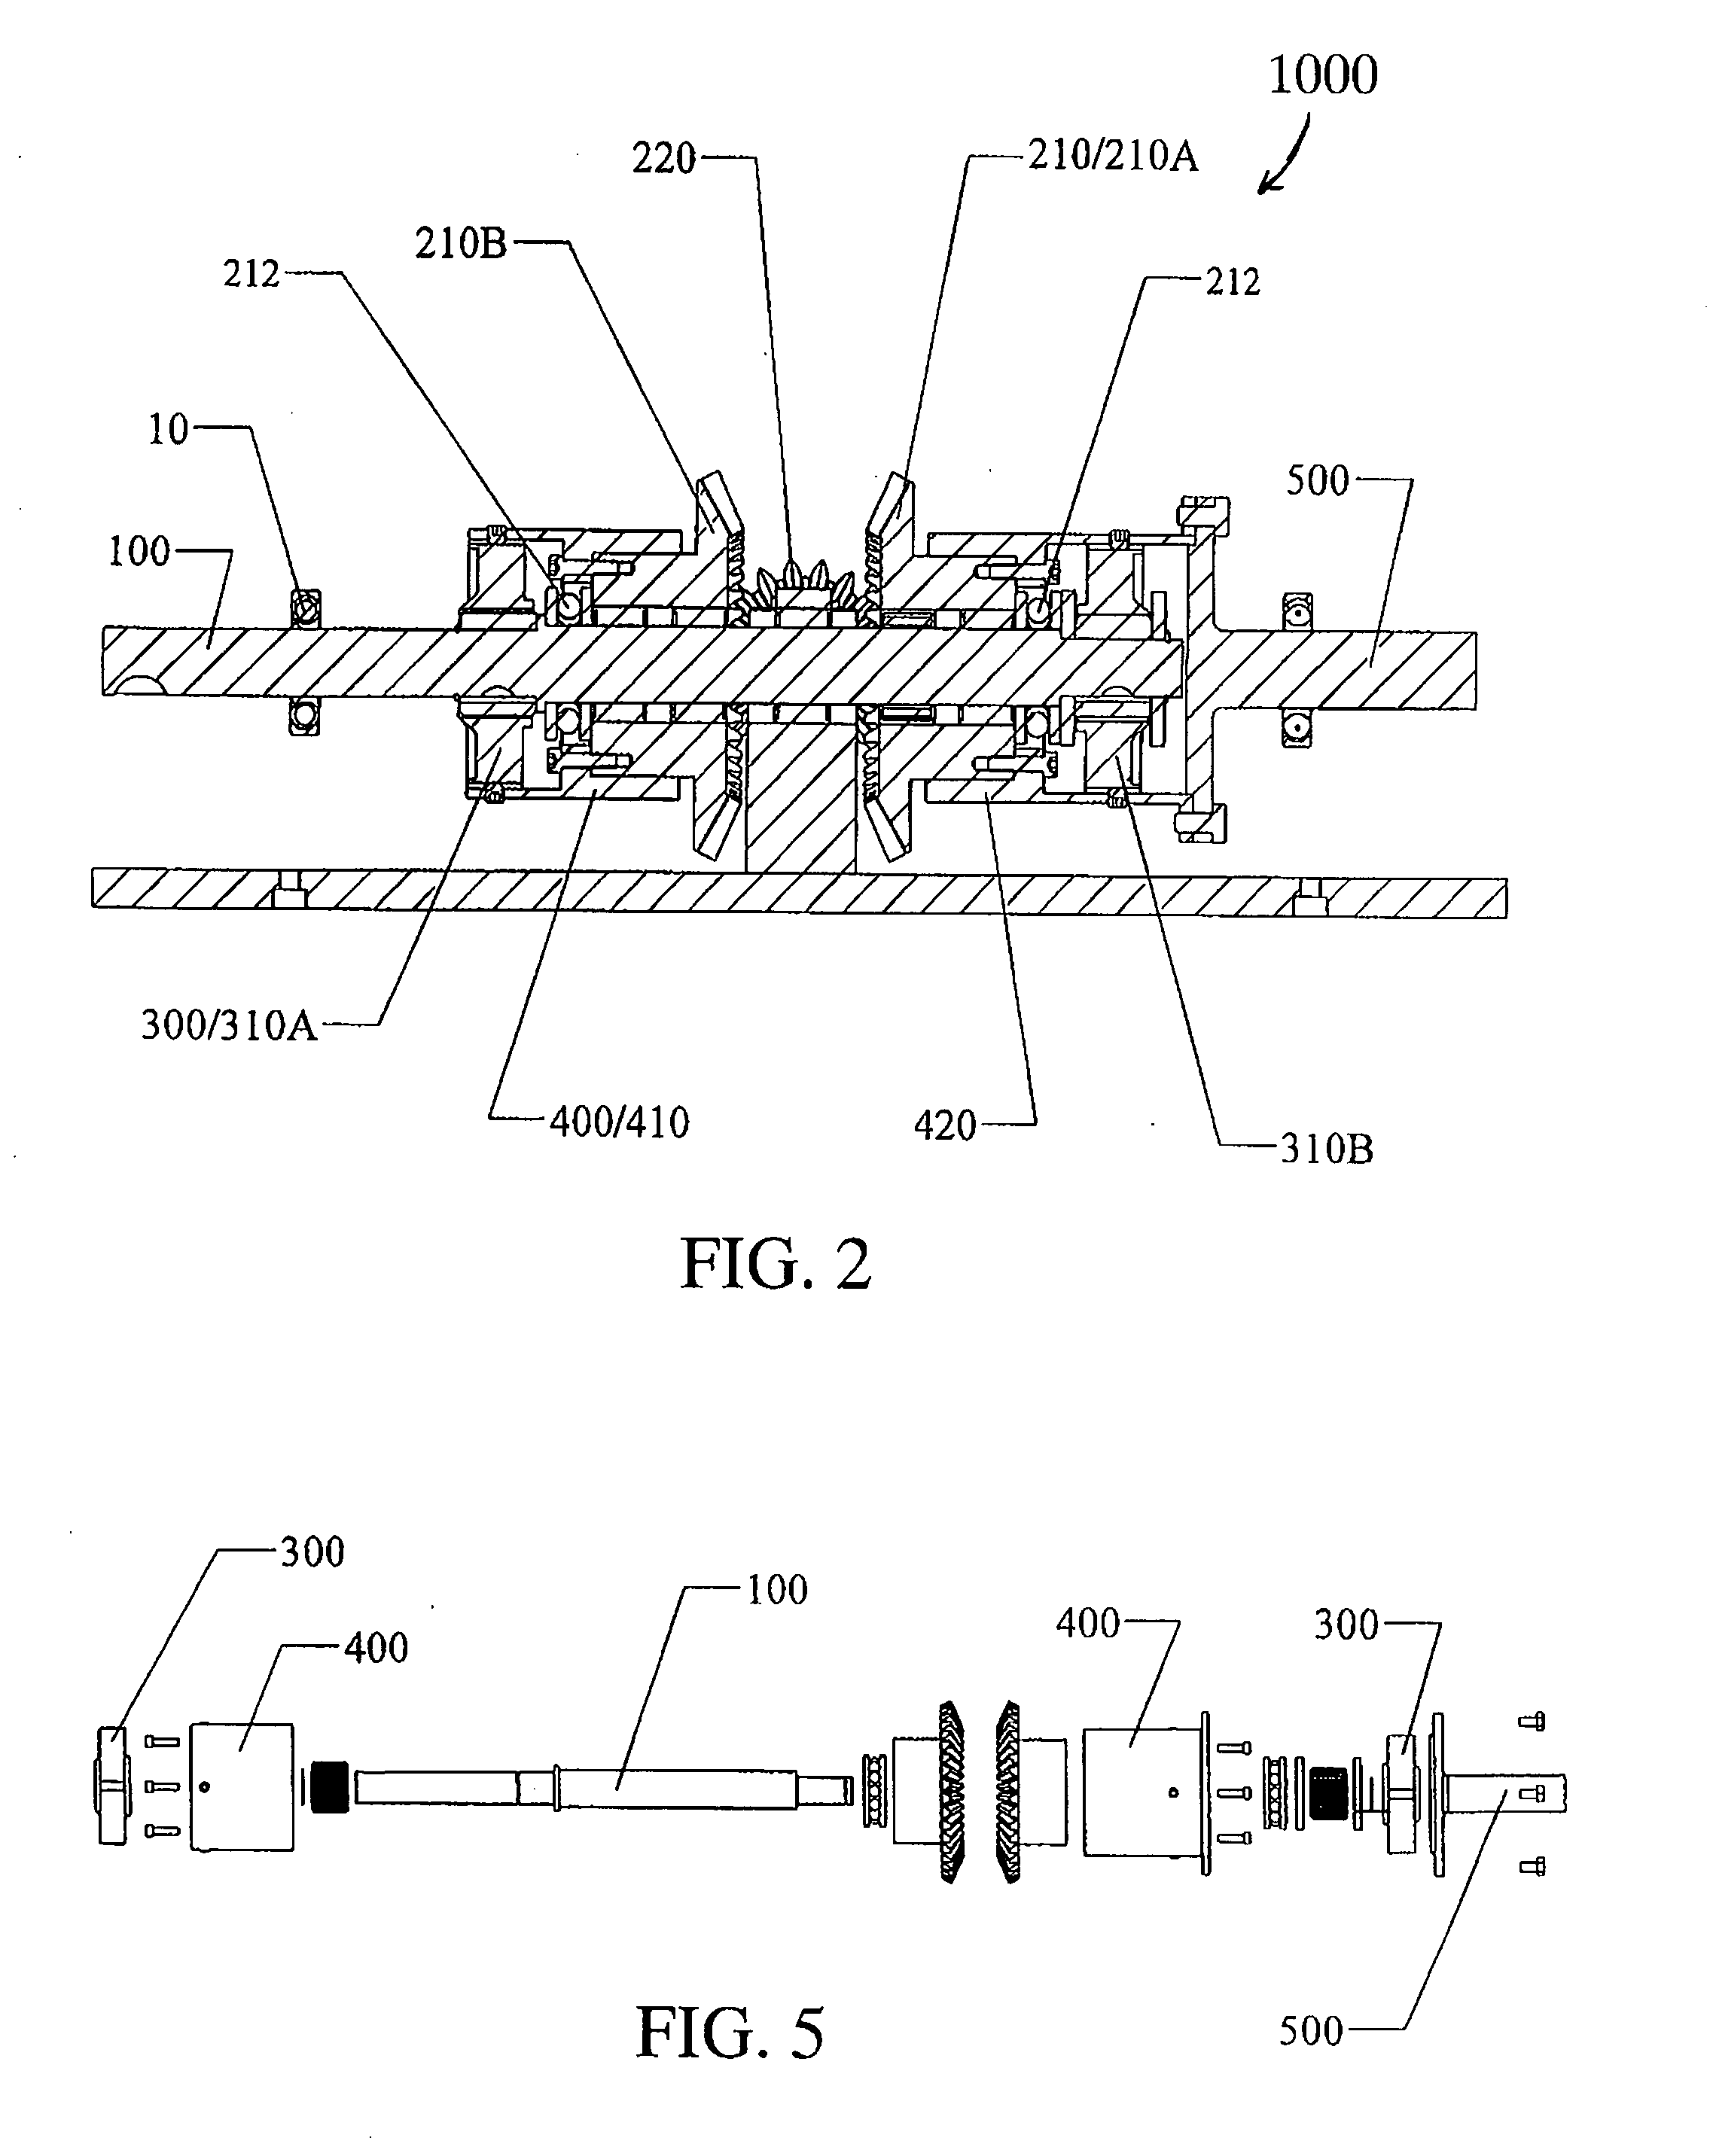 Reciprocating to rotary mechanical conversion device